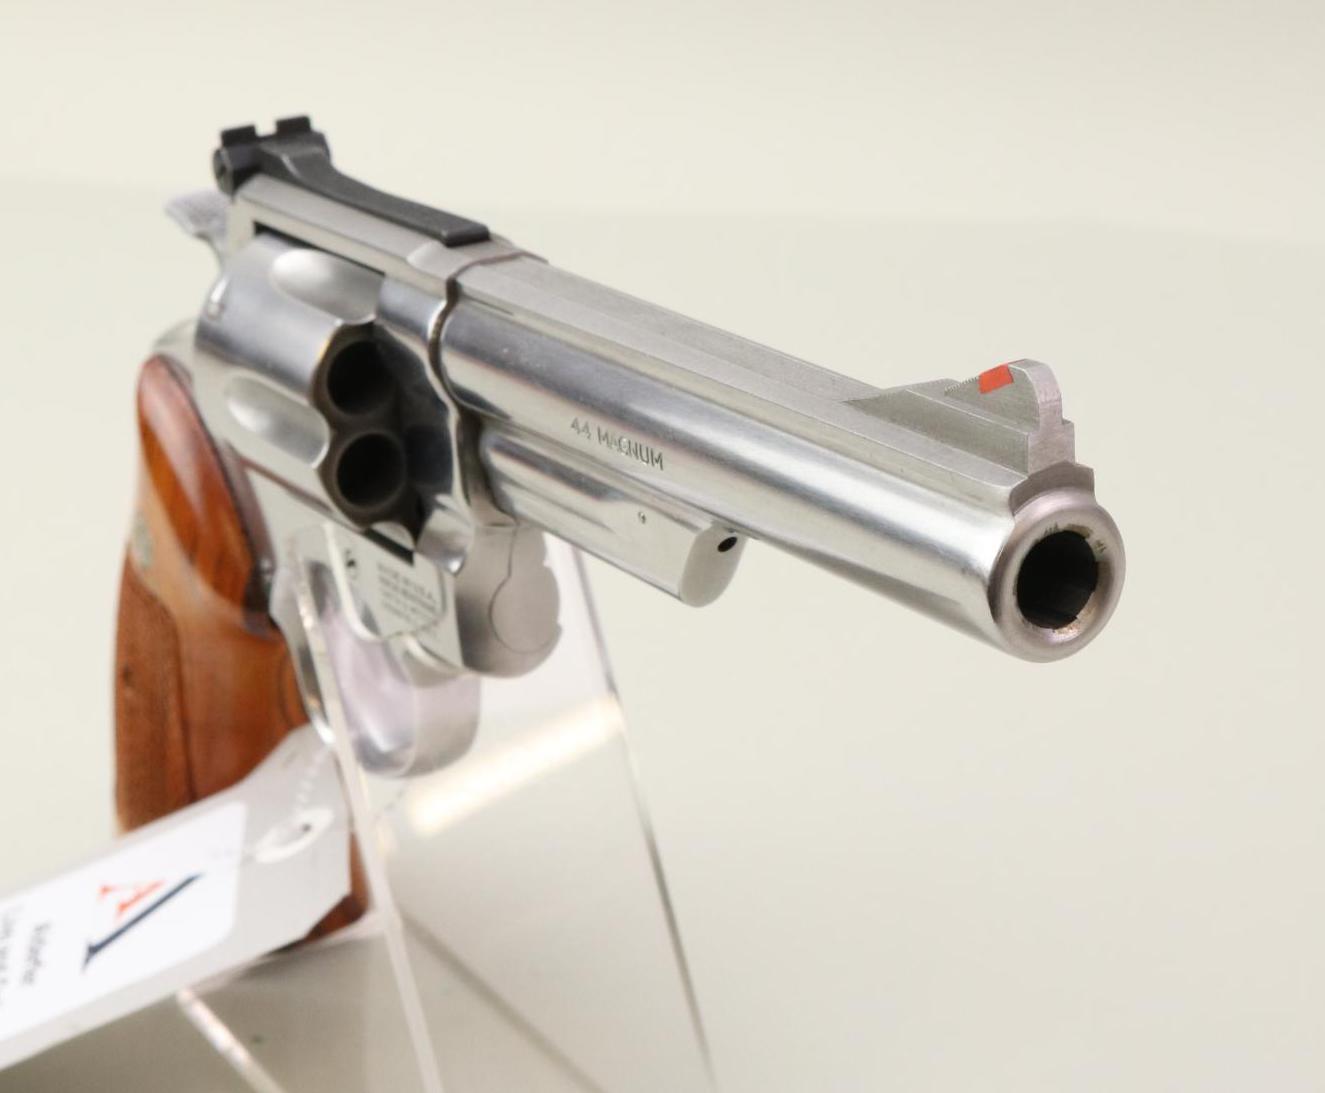 Smith & Wesson 629-1 double action revolver.